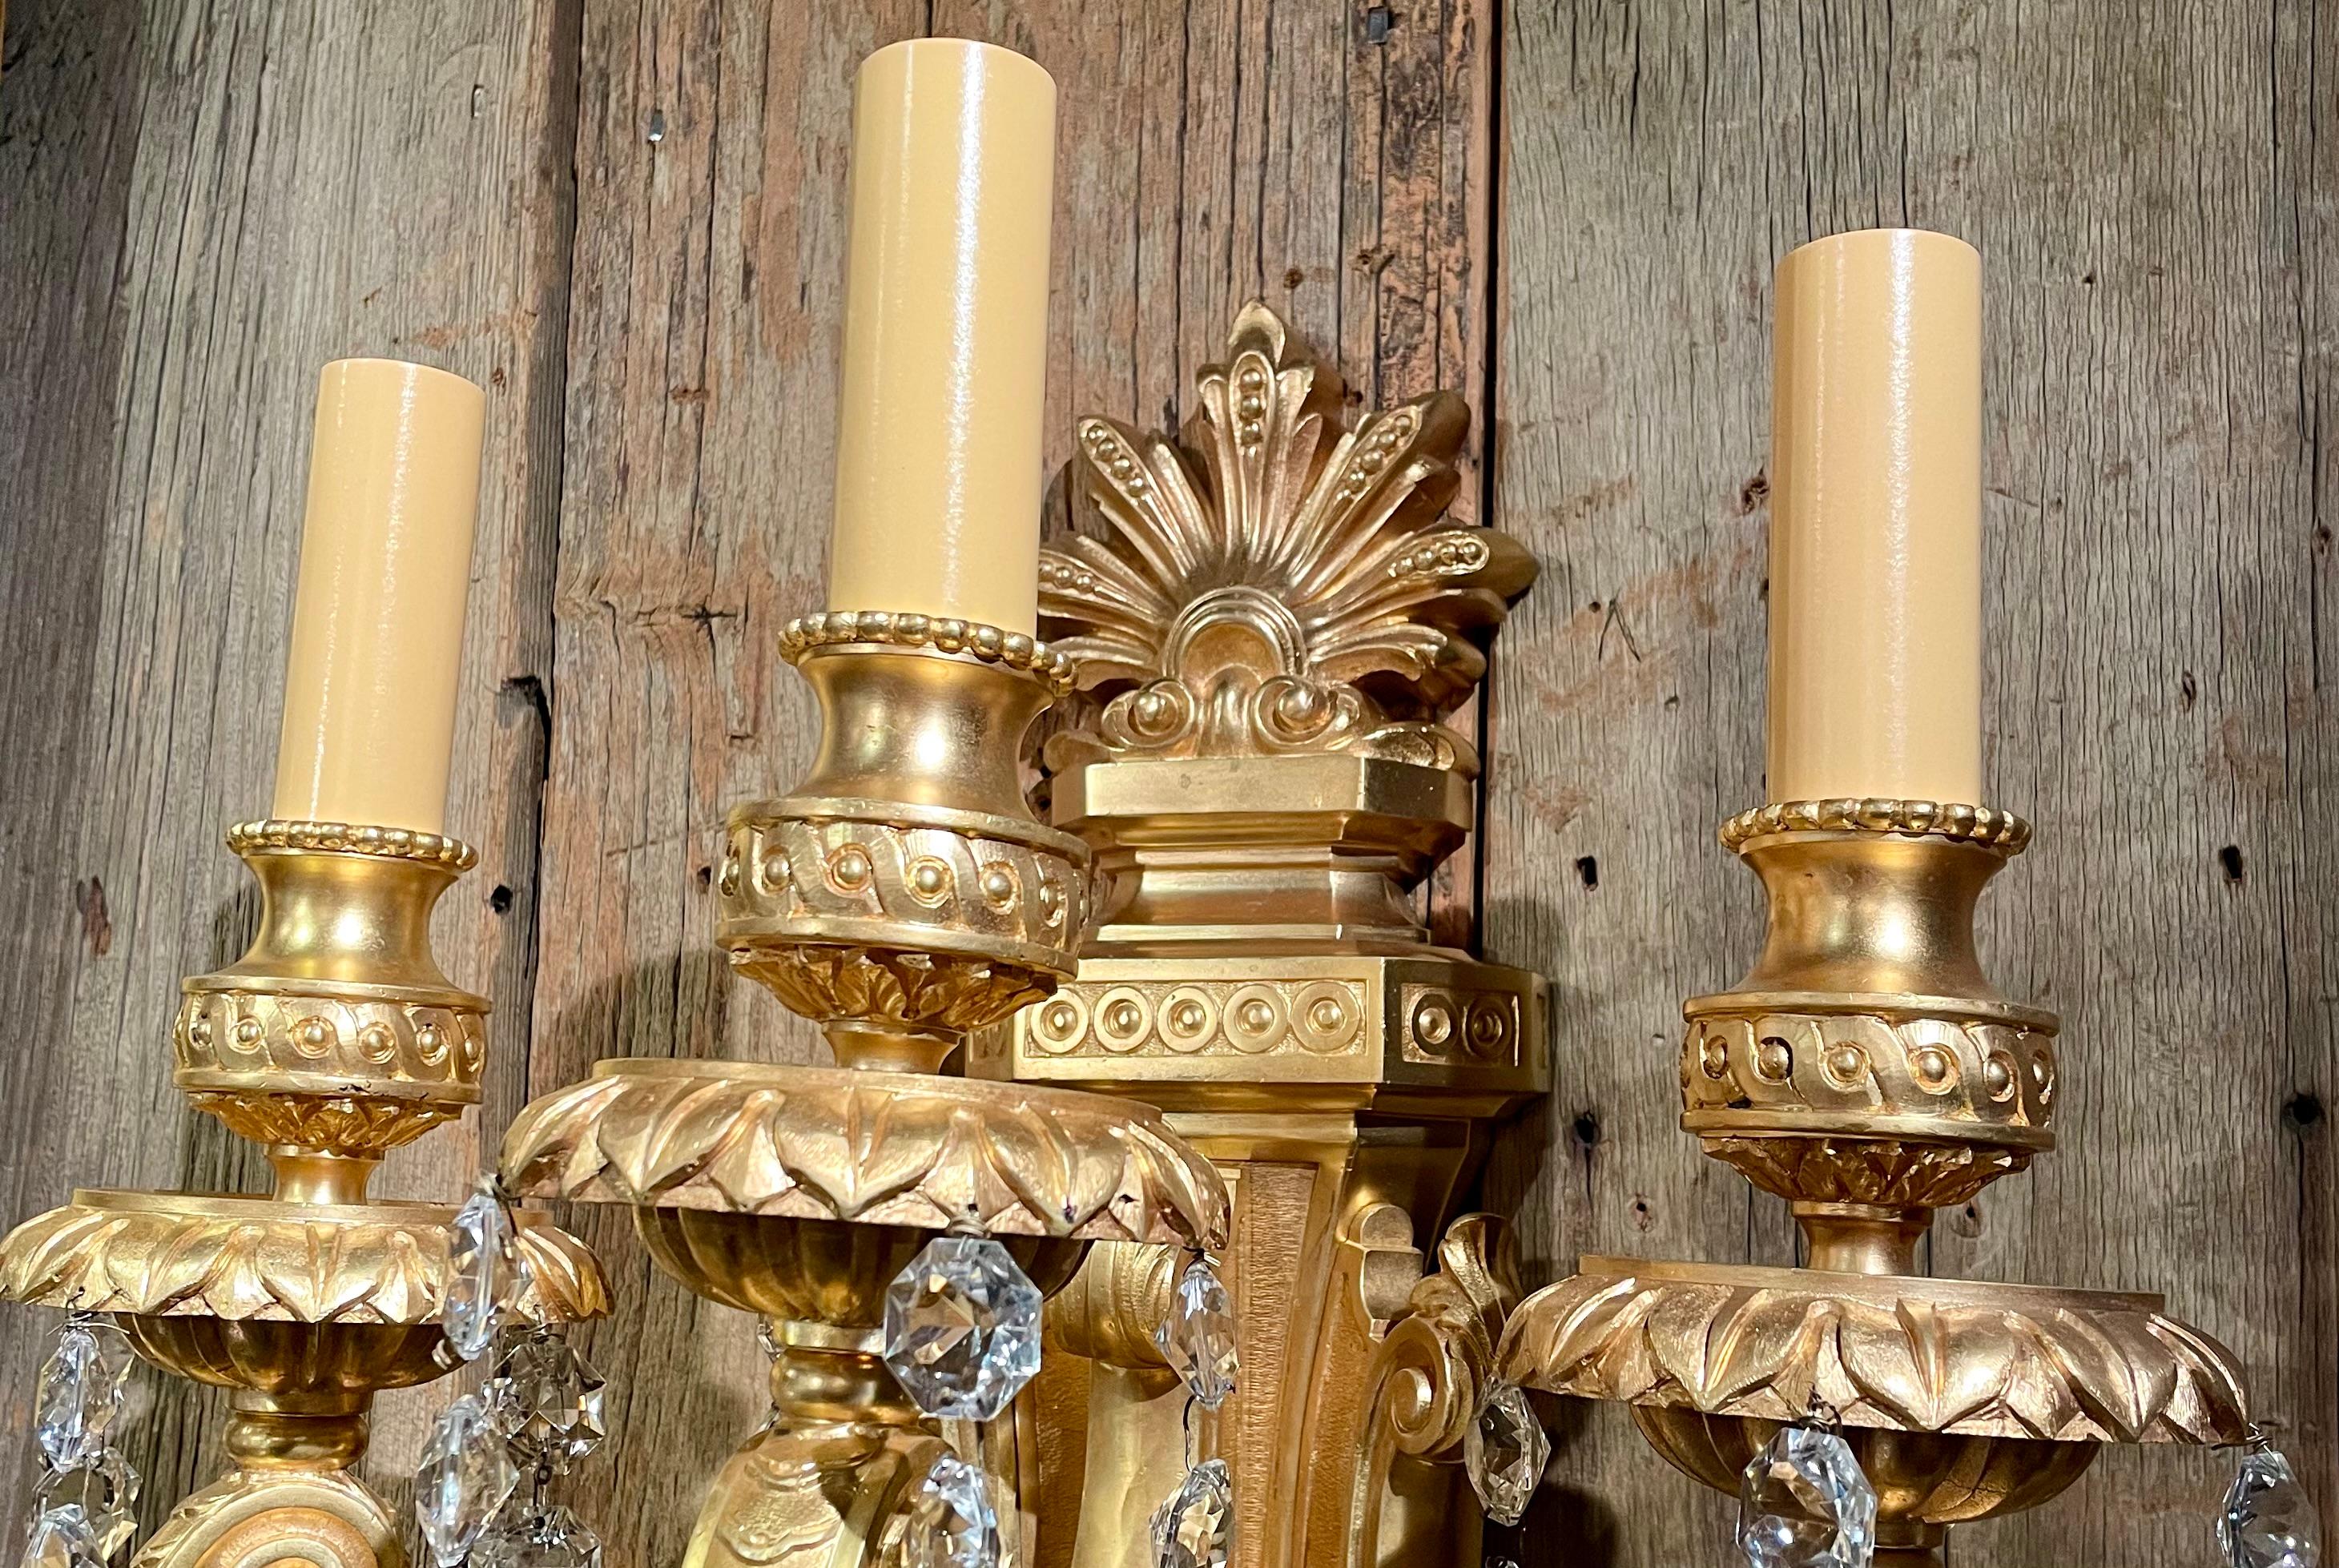 Pair of Antique French Regency Ormolu Chateau Lights / Sconces, Circa 1840-1850. For Sale 1